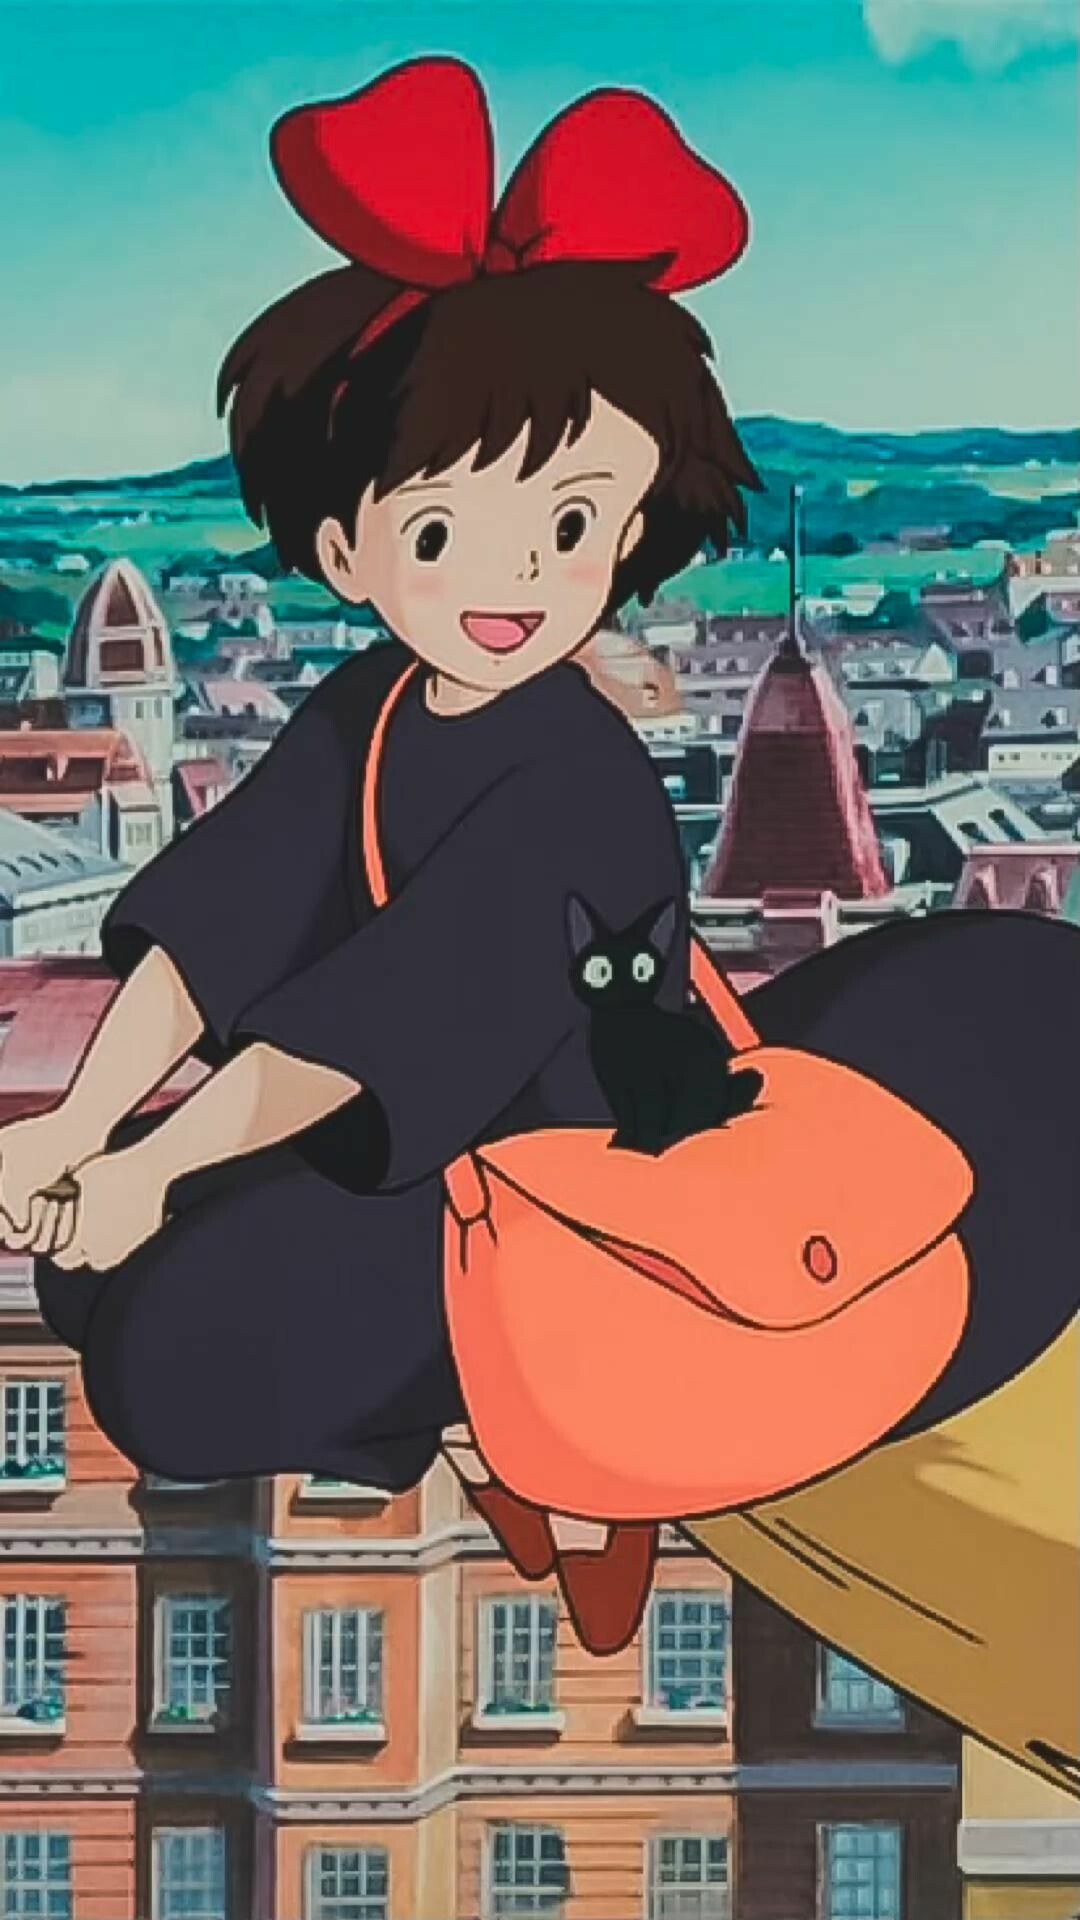 Kiki's Delivery Service: The film was released on July 22, 1989, and won the Animage Anime Grand Prix prize. 1080x1920 Full HD Wallpaper.